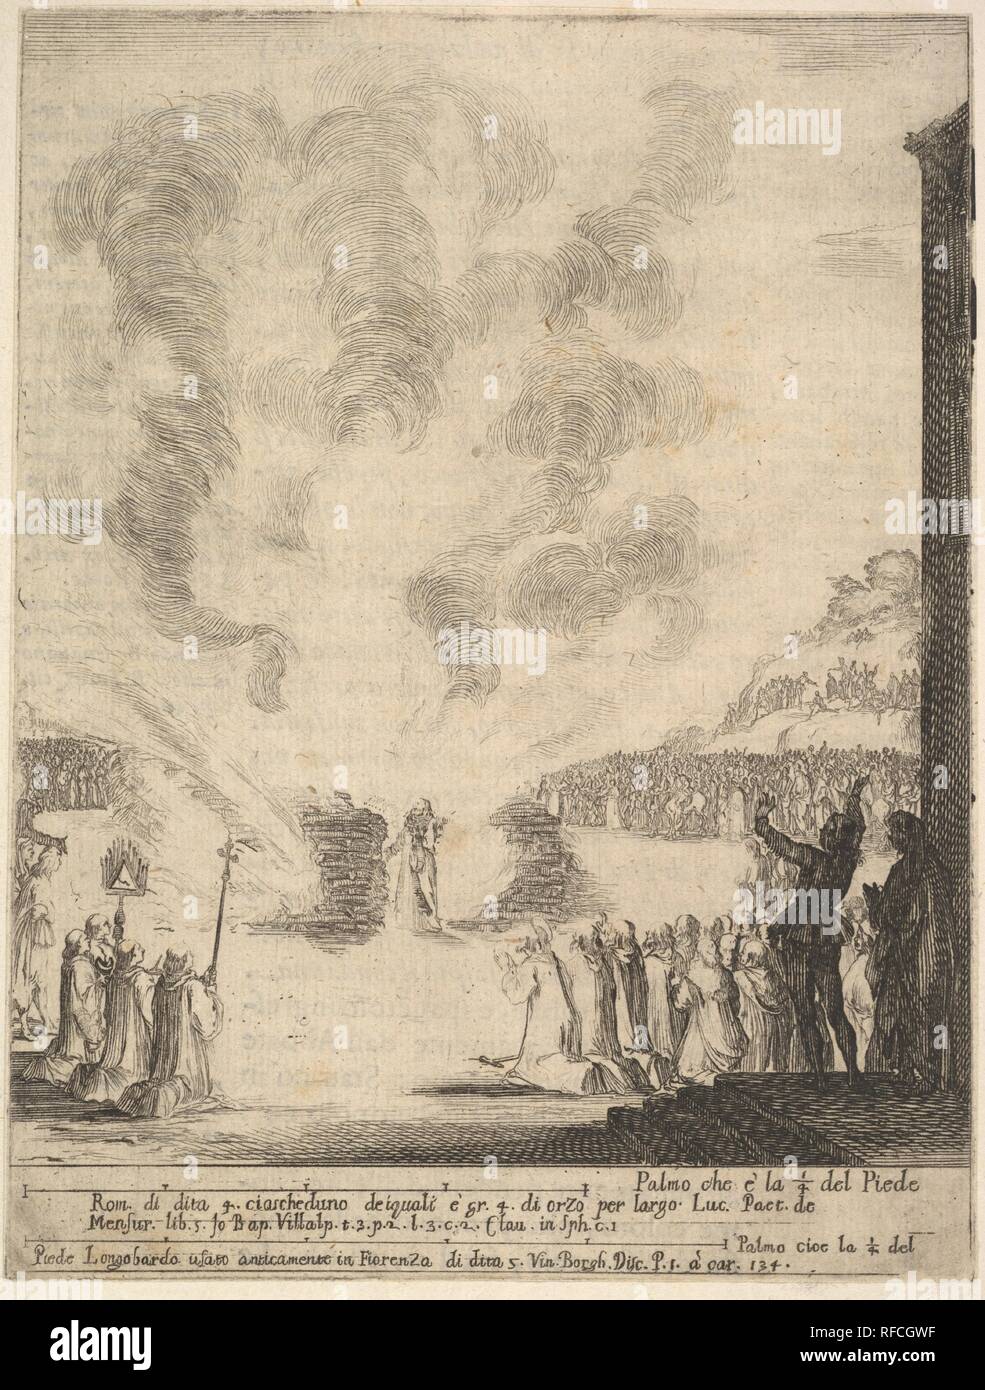 The test of fire, the monk Peter, the disciple Saint John Gualbert, passing through the flames from two pyres unharmed, various spectators to either side, from 'Frontispiece and four scenes from the life of Saint John Gualbert' (Frontispice et quatre vignettes pour une vie de Saint Jean Gualbert). Artist: Stefano della Bella (Italian, Florence 1610-1664 Florence). Dimensions: Sheet: 6 13/16 x 5 3/16 in. (17.3 x 13.2 cm)  Mount: 7 1/2 x 5 13/16 in. (19 x 14.8 cm). Series/Portfolio: 'Frontispiece and four scenes from the life of Saint John Gualbert' (Frontispice et quatre vignettes pour une vie  Stock Photo